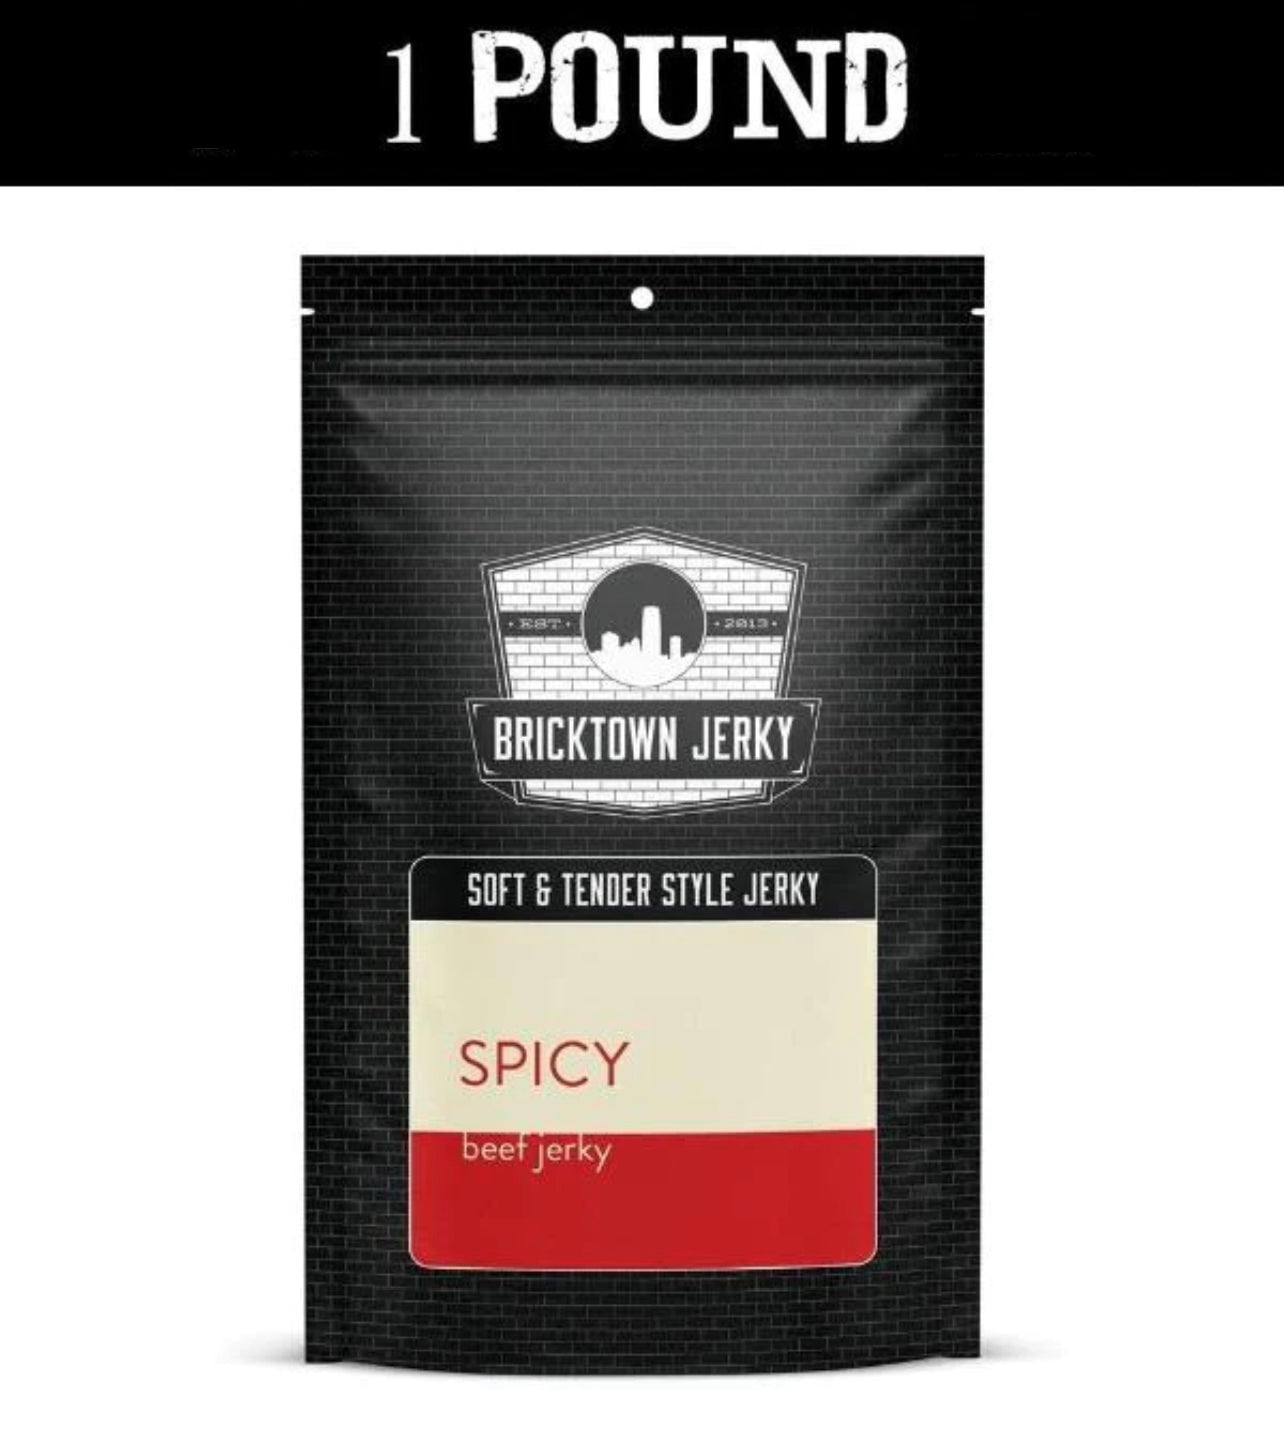 Soft and Tender Style Beef Jerky - Spicy - 1 Pound by Bricktown Jerky